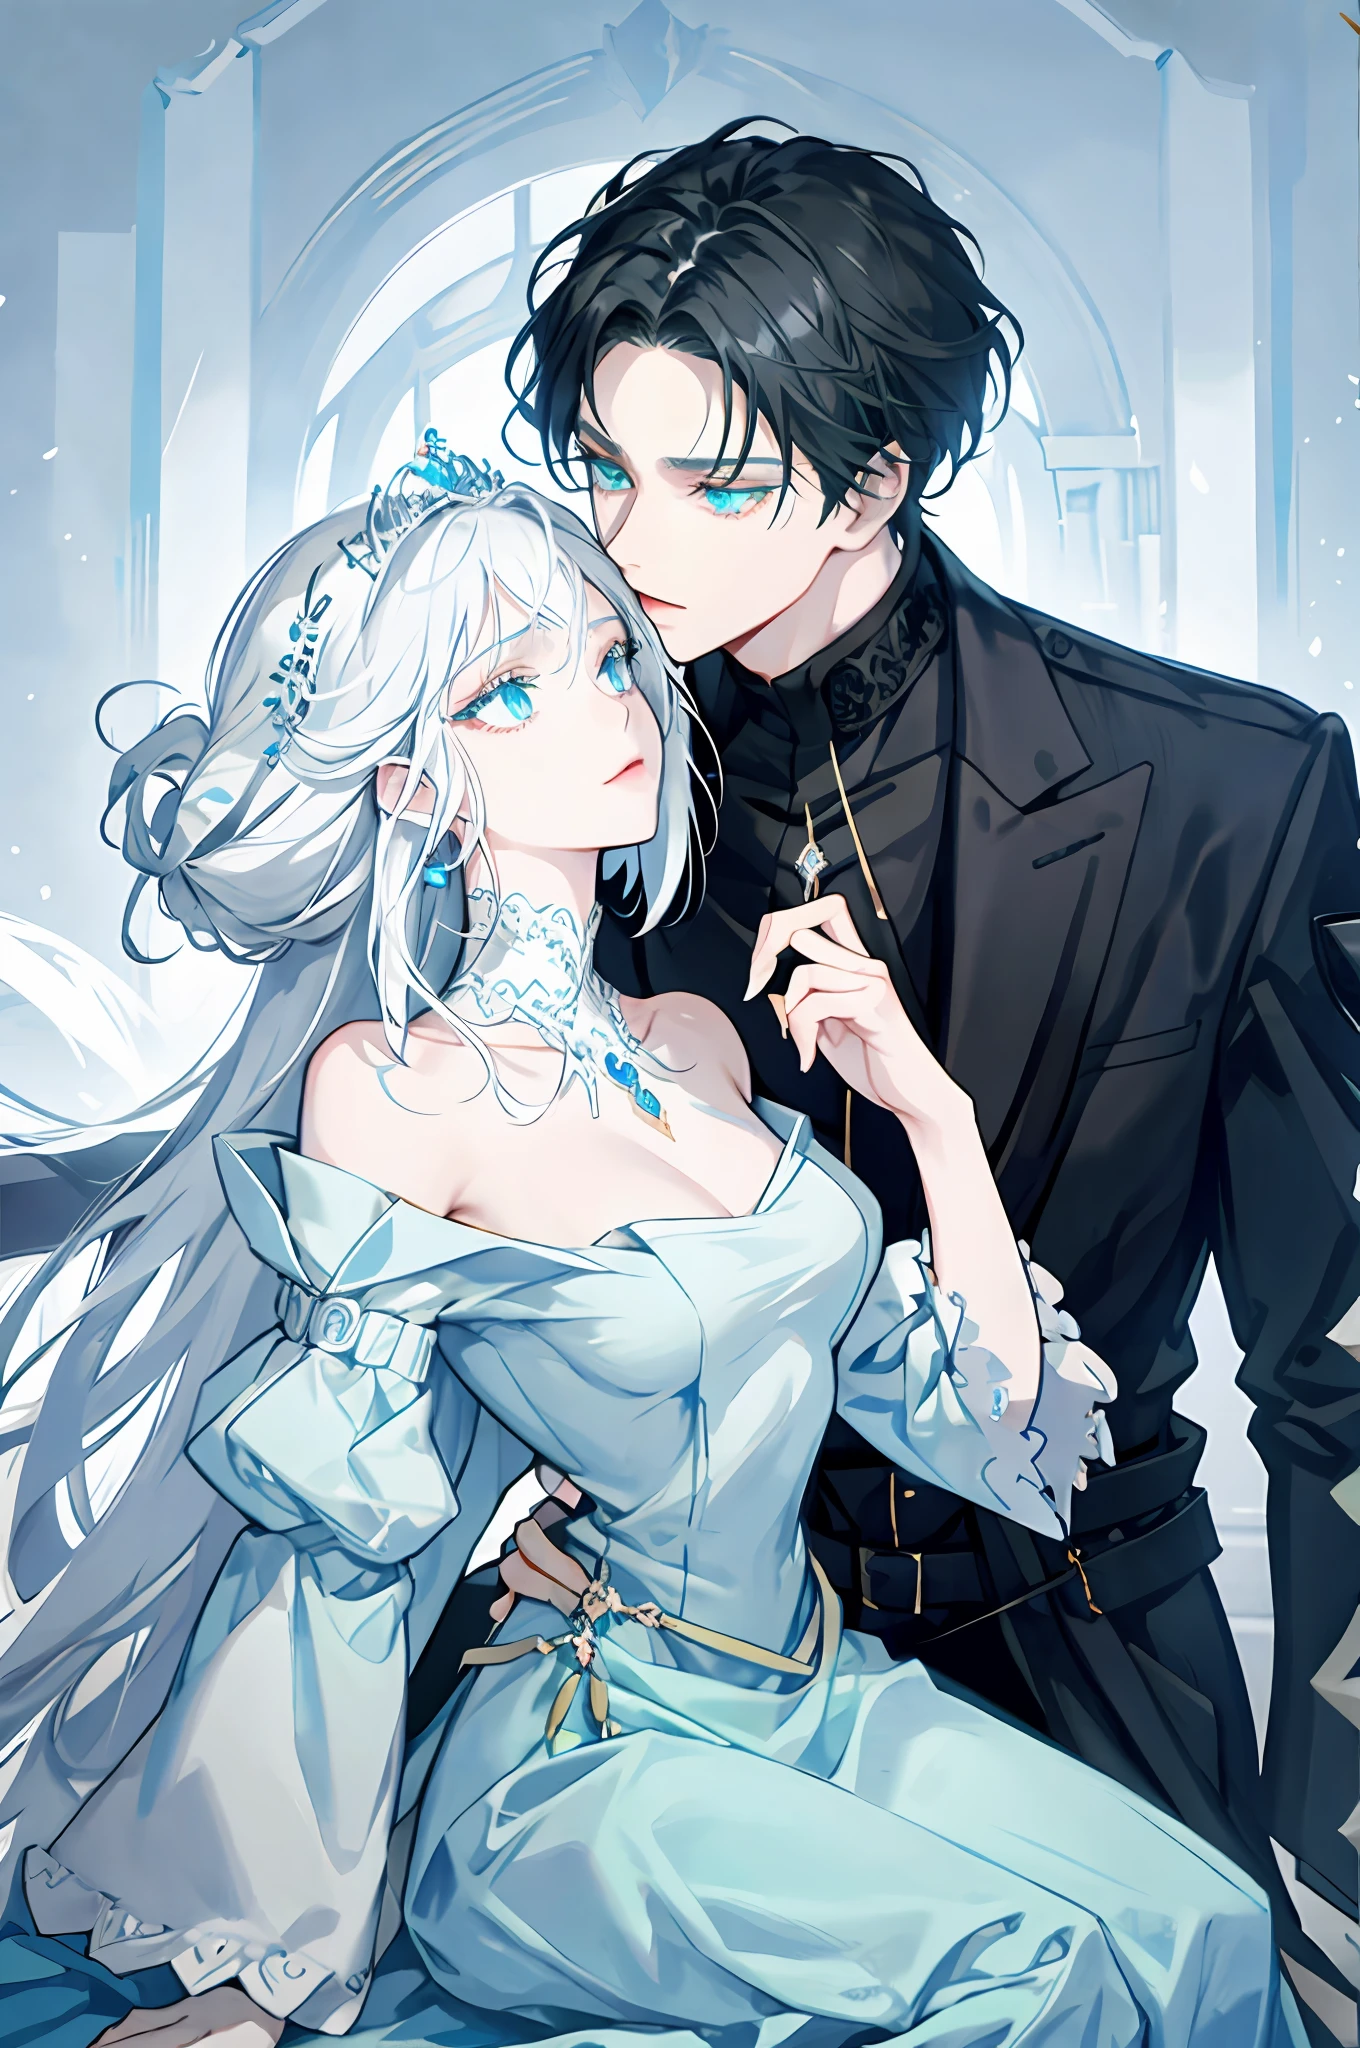 Man with black hair, green eyes, kissing a woman with white hair (light blue eyes), high quality, royalty, nobility, princess, elegant, detailed face, love